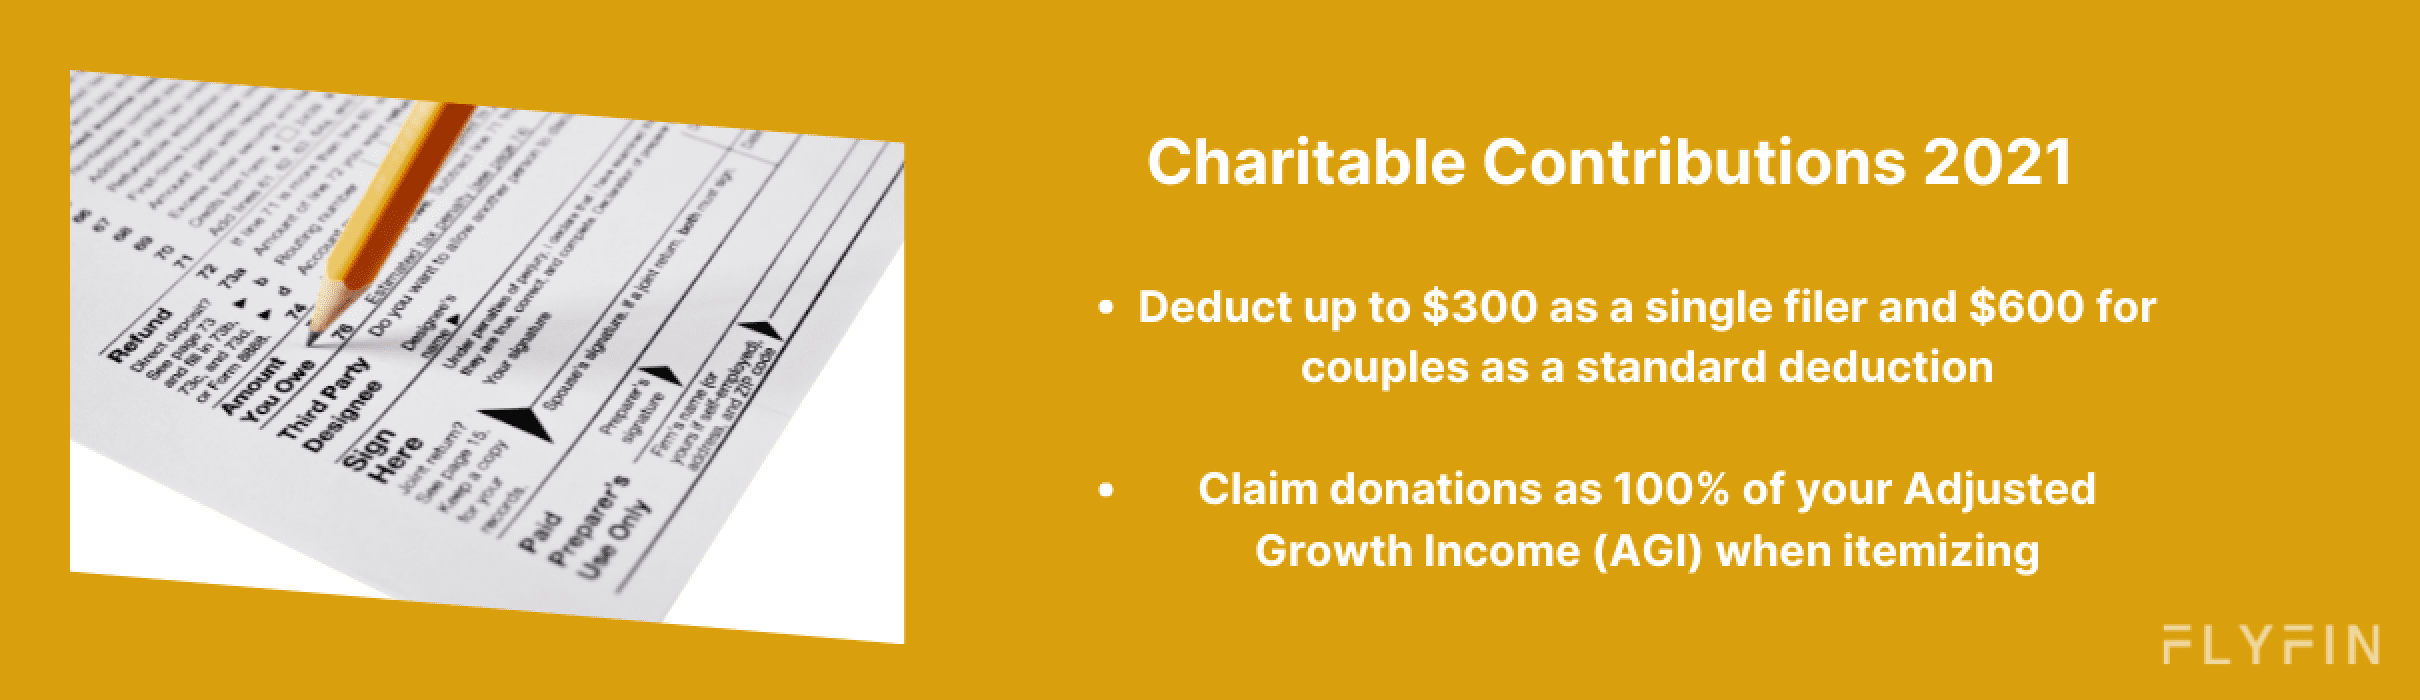 Charitable contributions 2021 tax year